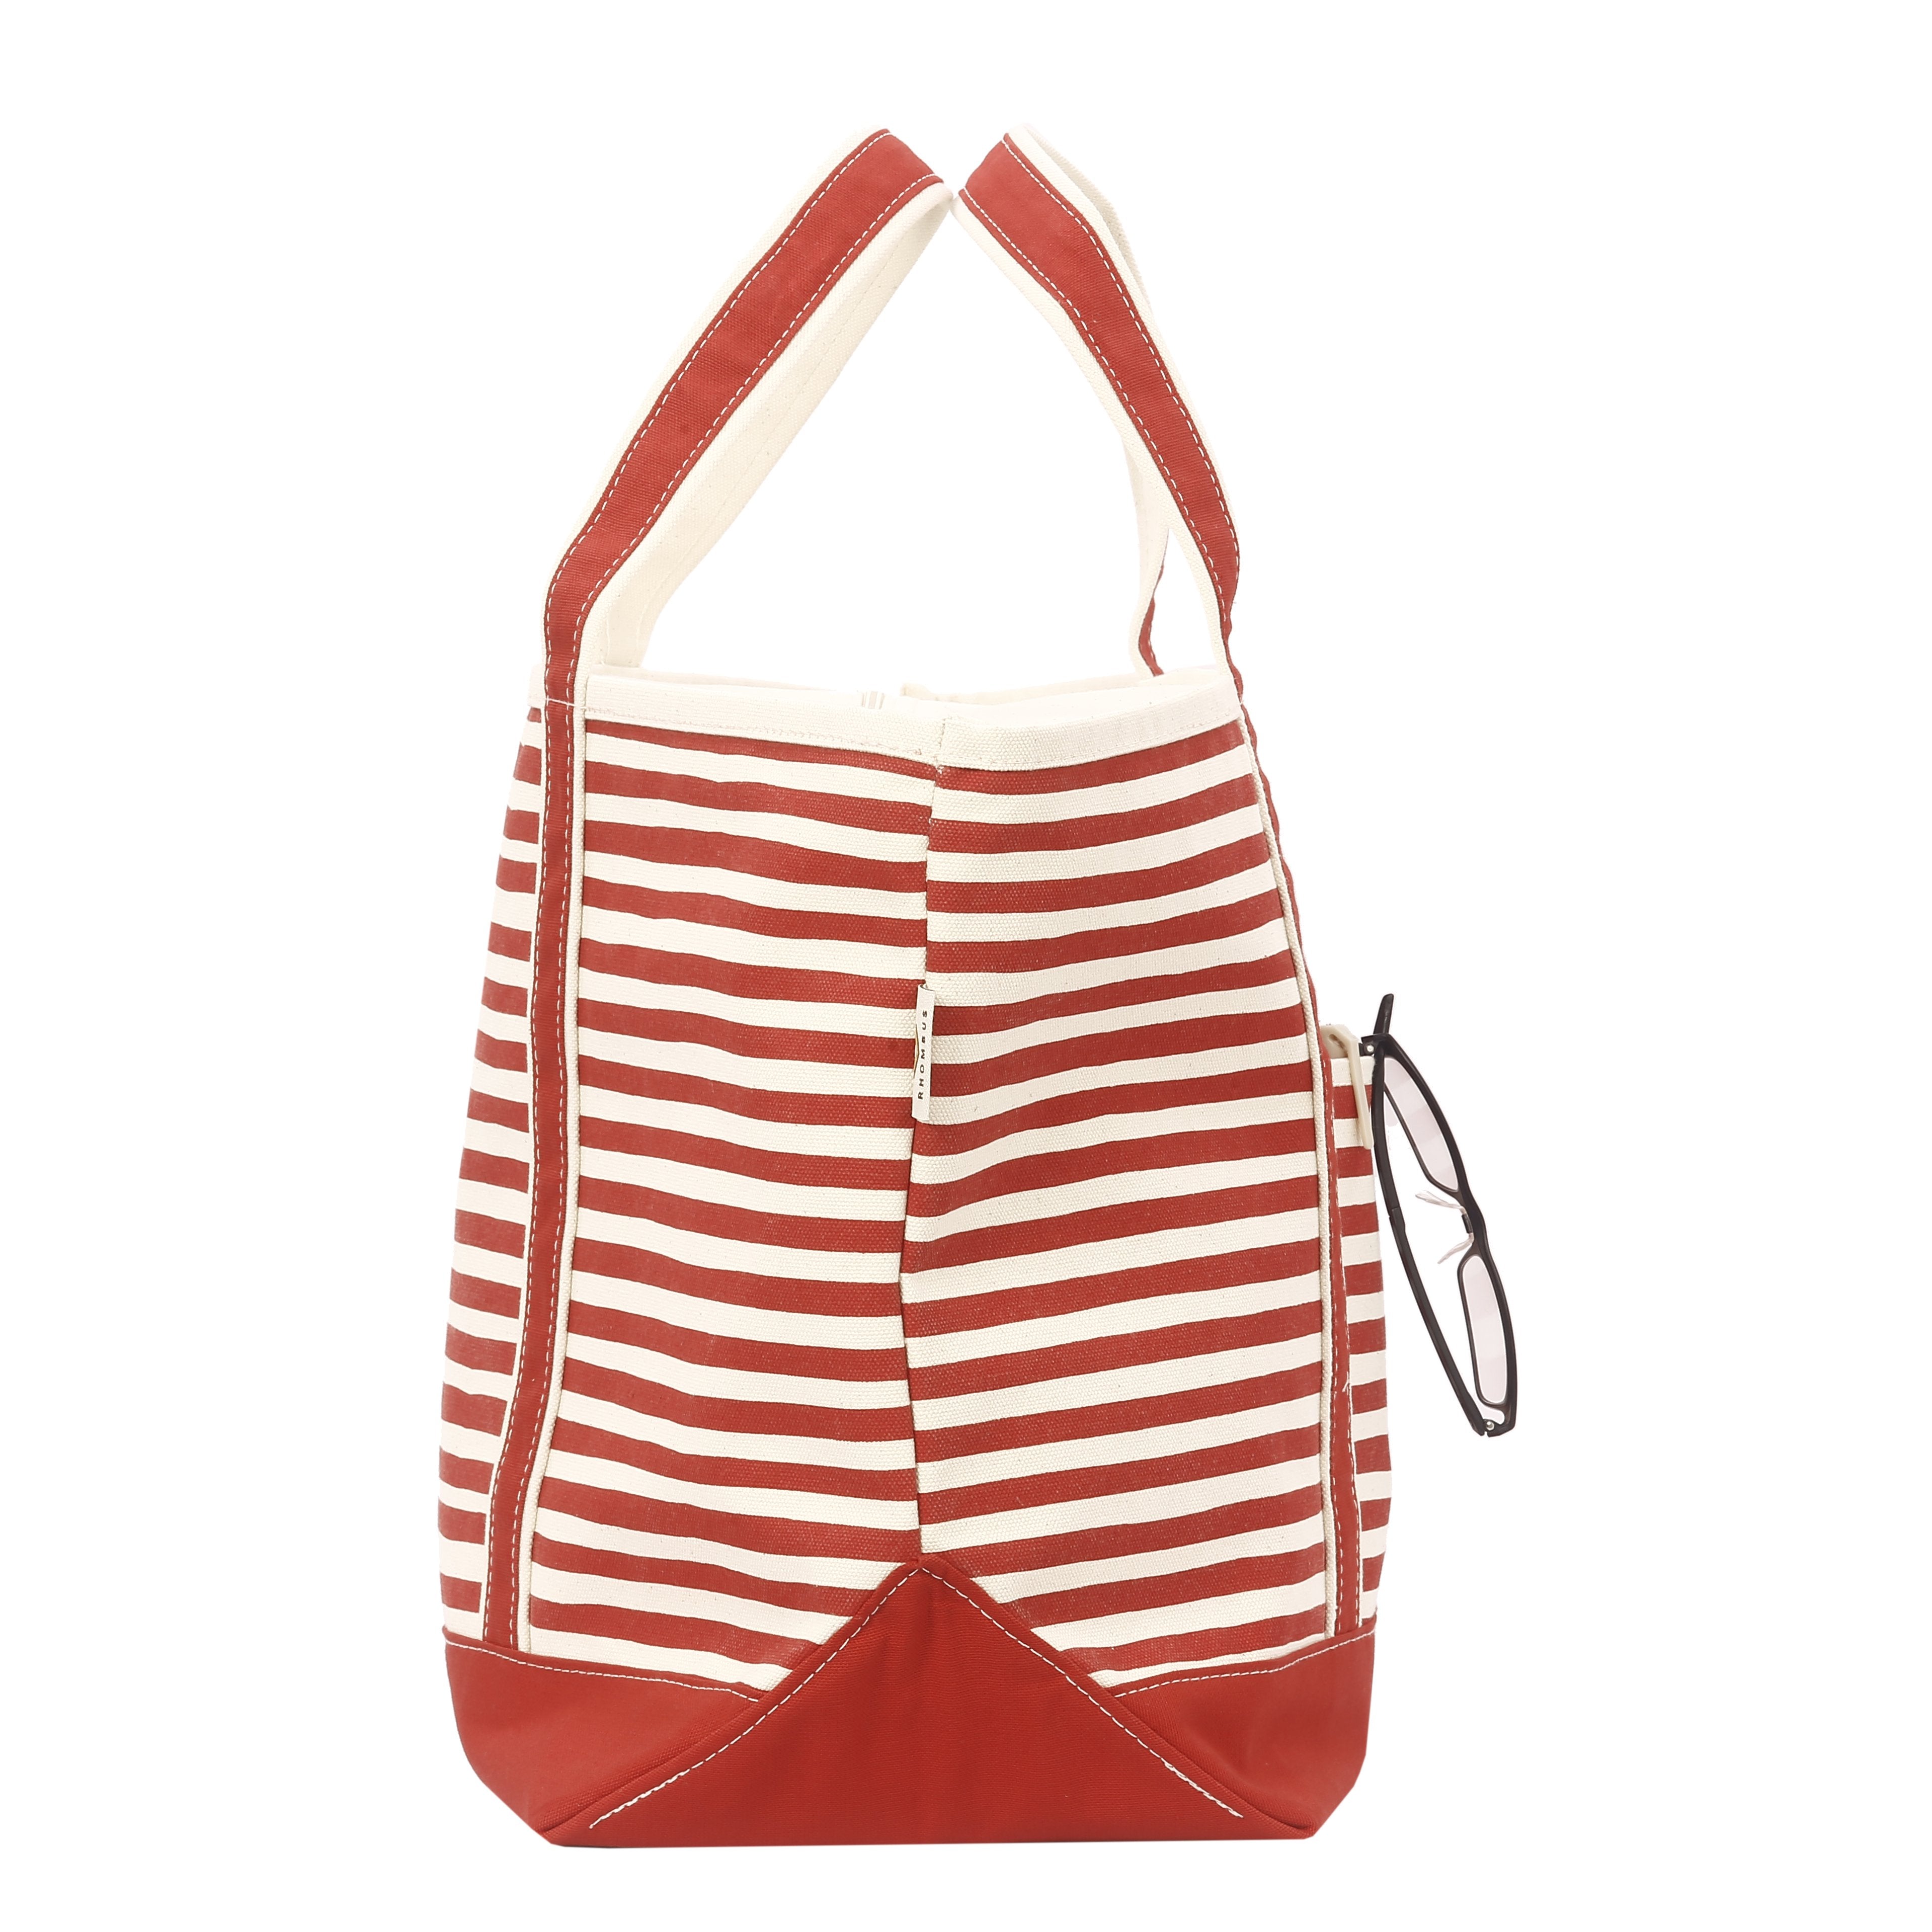 Rhombus Canvas Boat Tote Large Karma Stripe - Red - All Purpose Totes